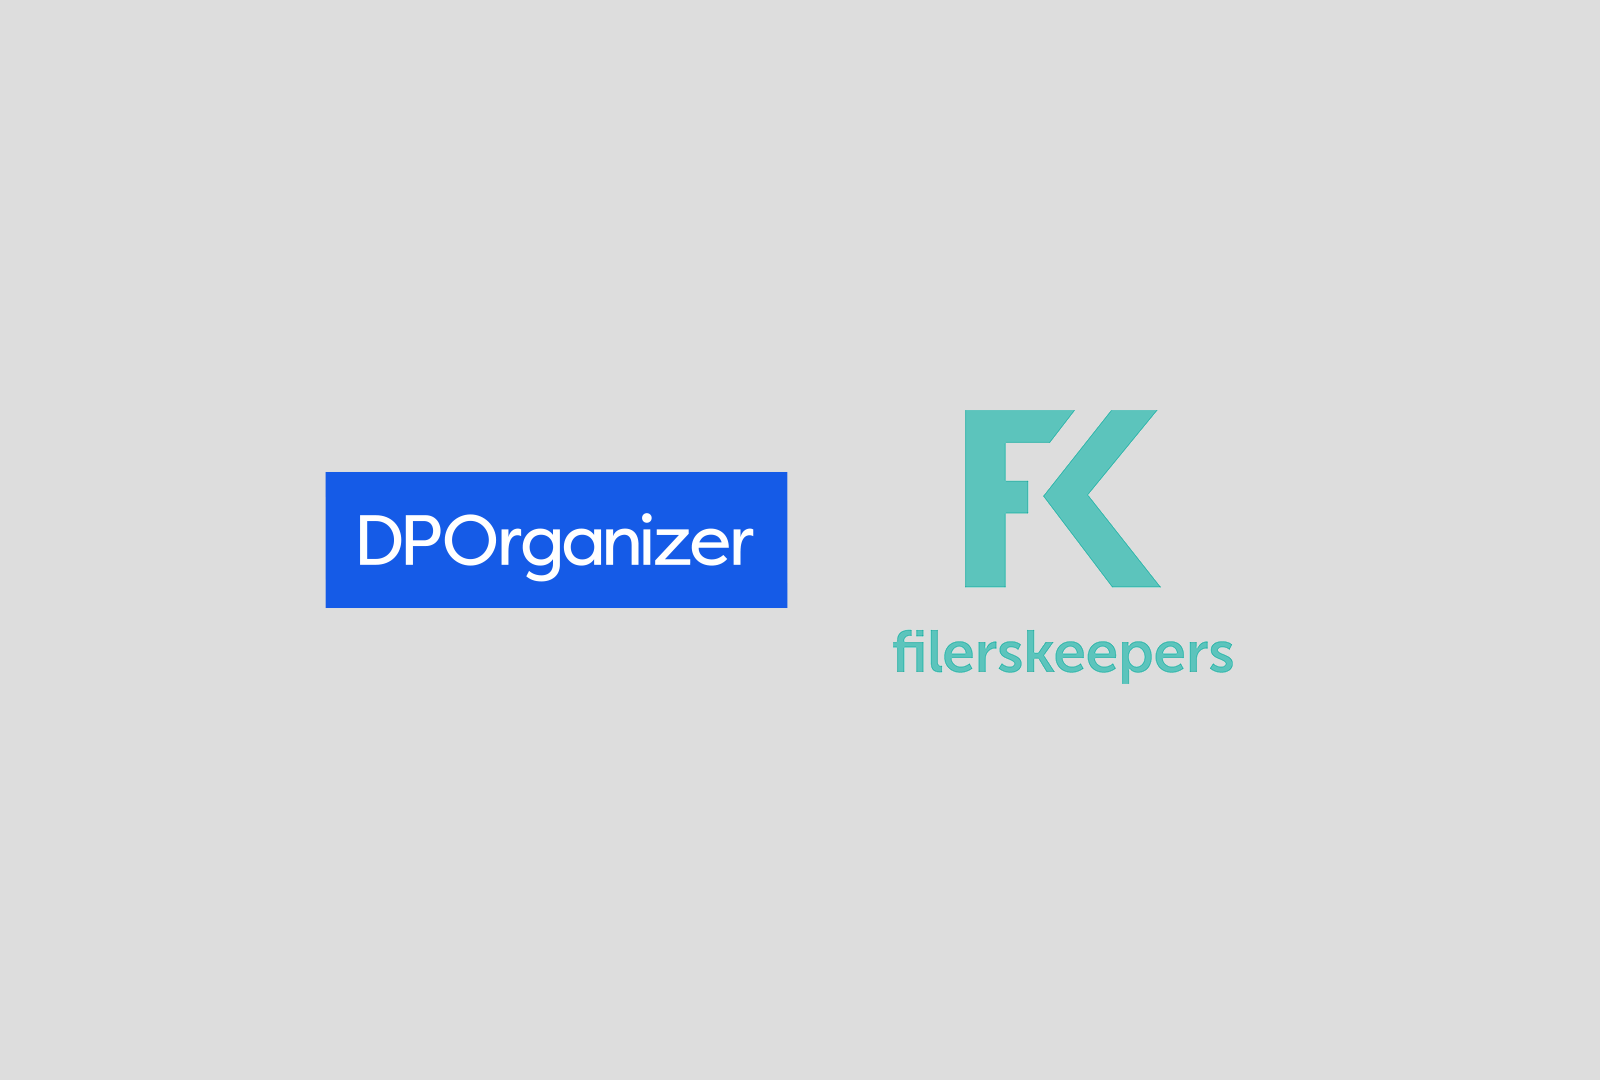 DPOrganizer and filerskeepers launch partnership for global data retention requirements